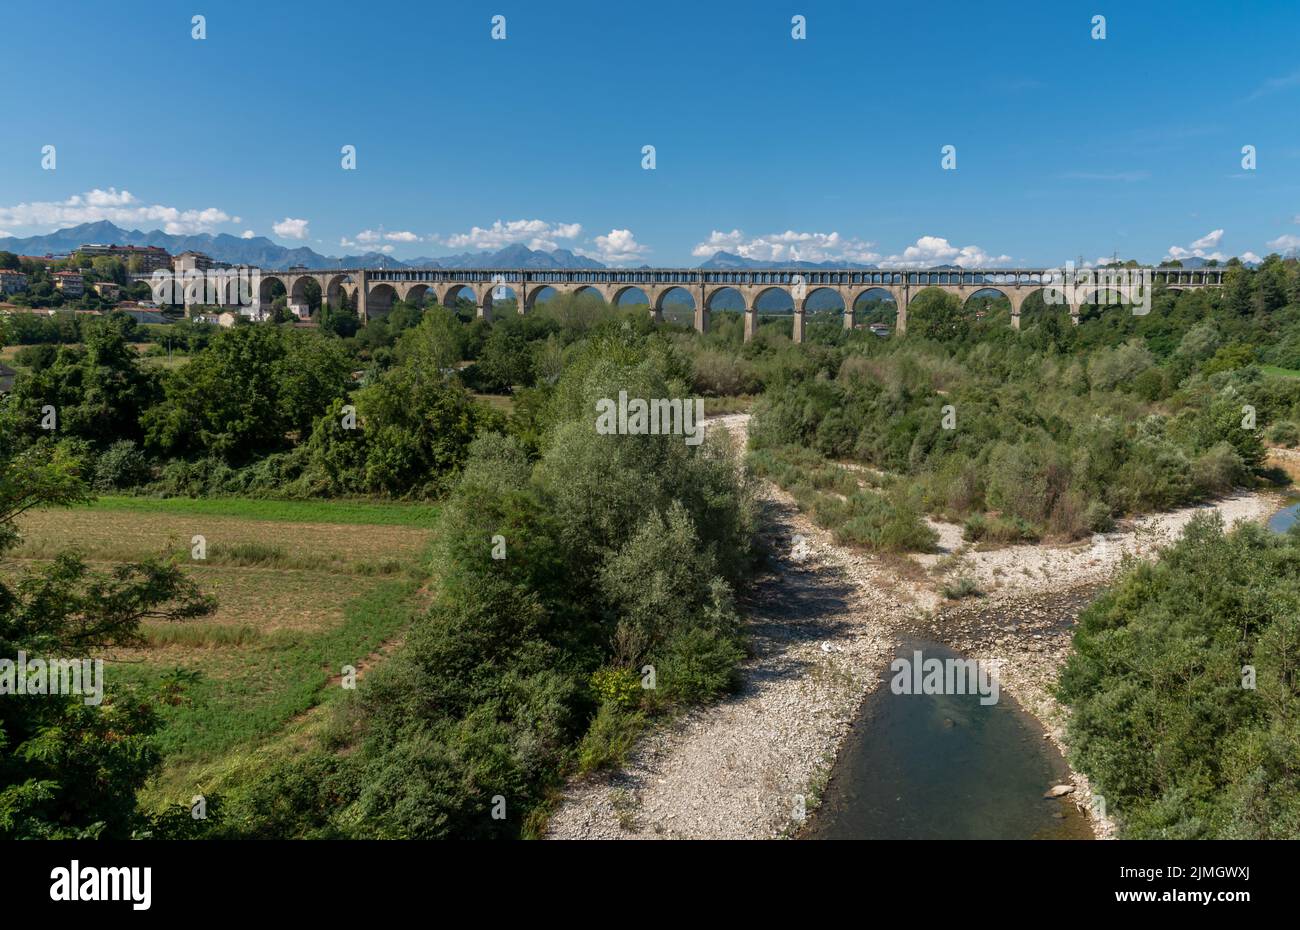 Cuneo, Piedmont, Italy - August 06, 2022: The Soleri viaduct, it is a promiscuous road and rail bridge on the Stura di Demonte river, in the backgroun Stock Photo